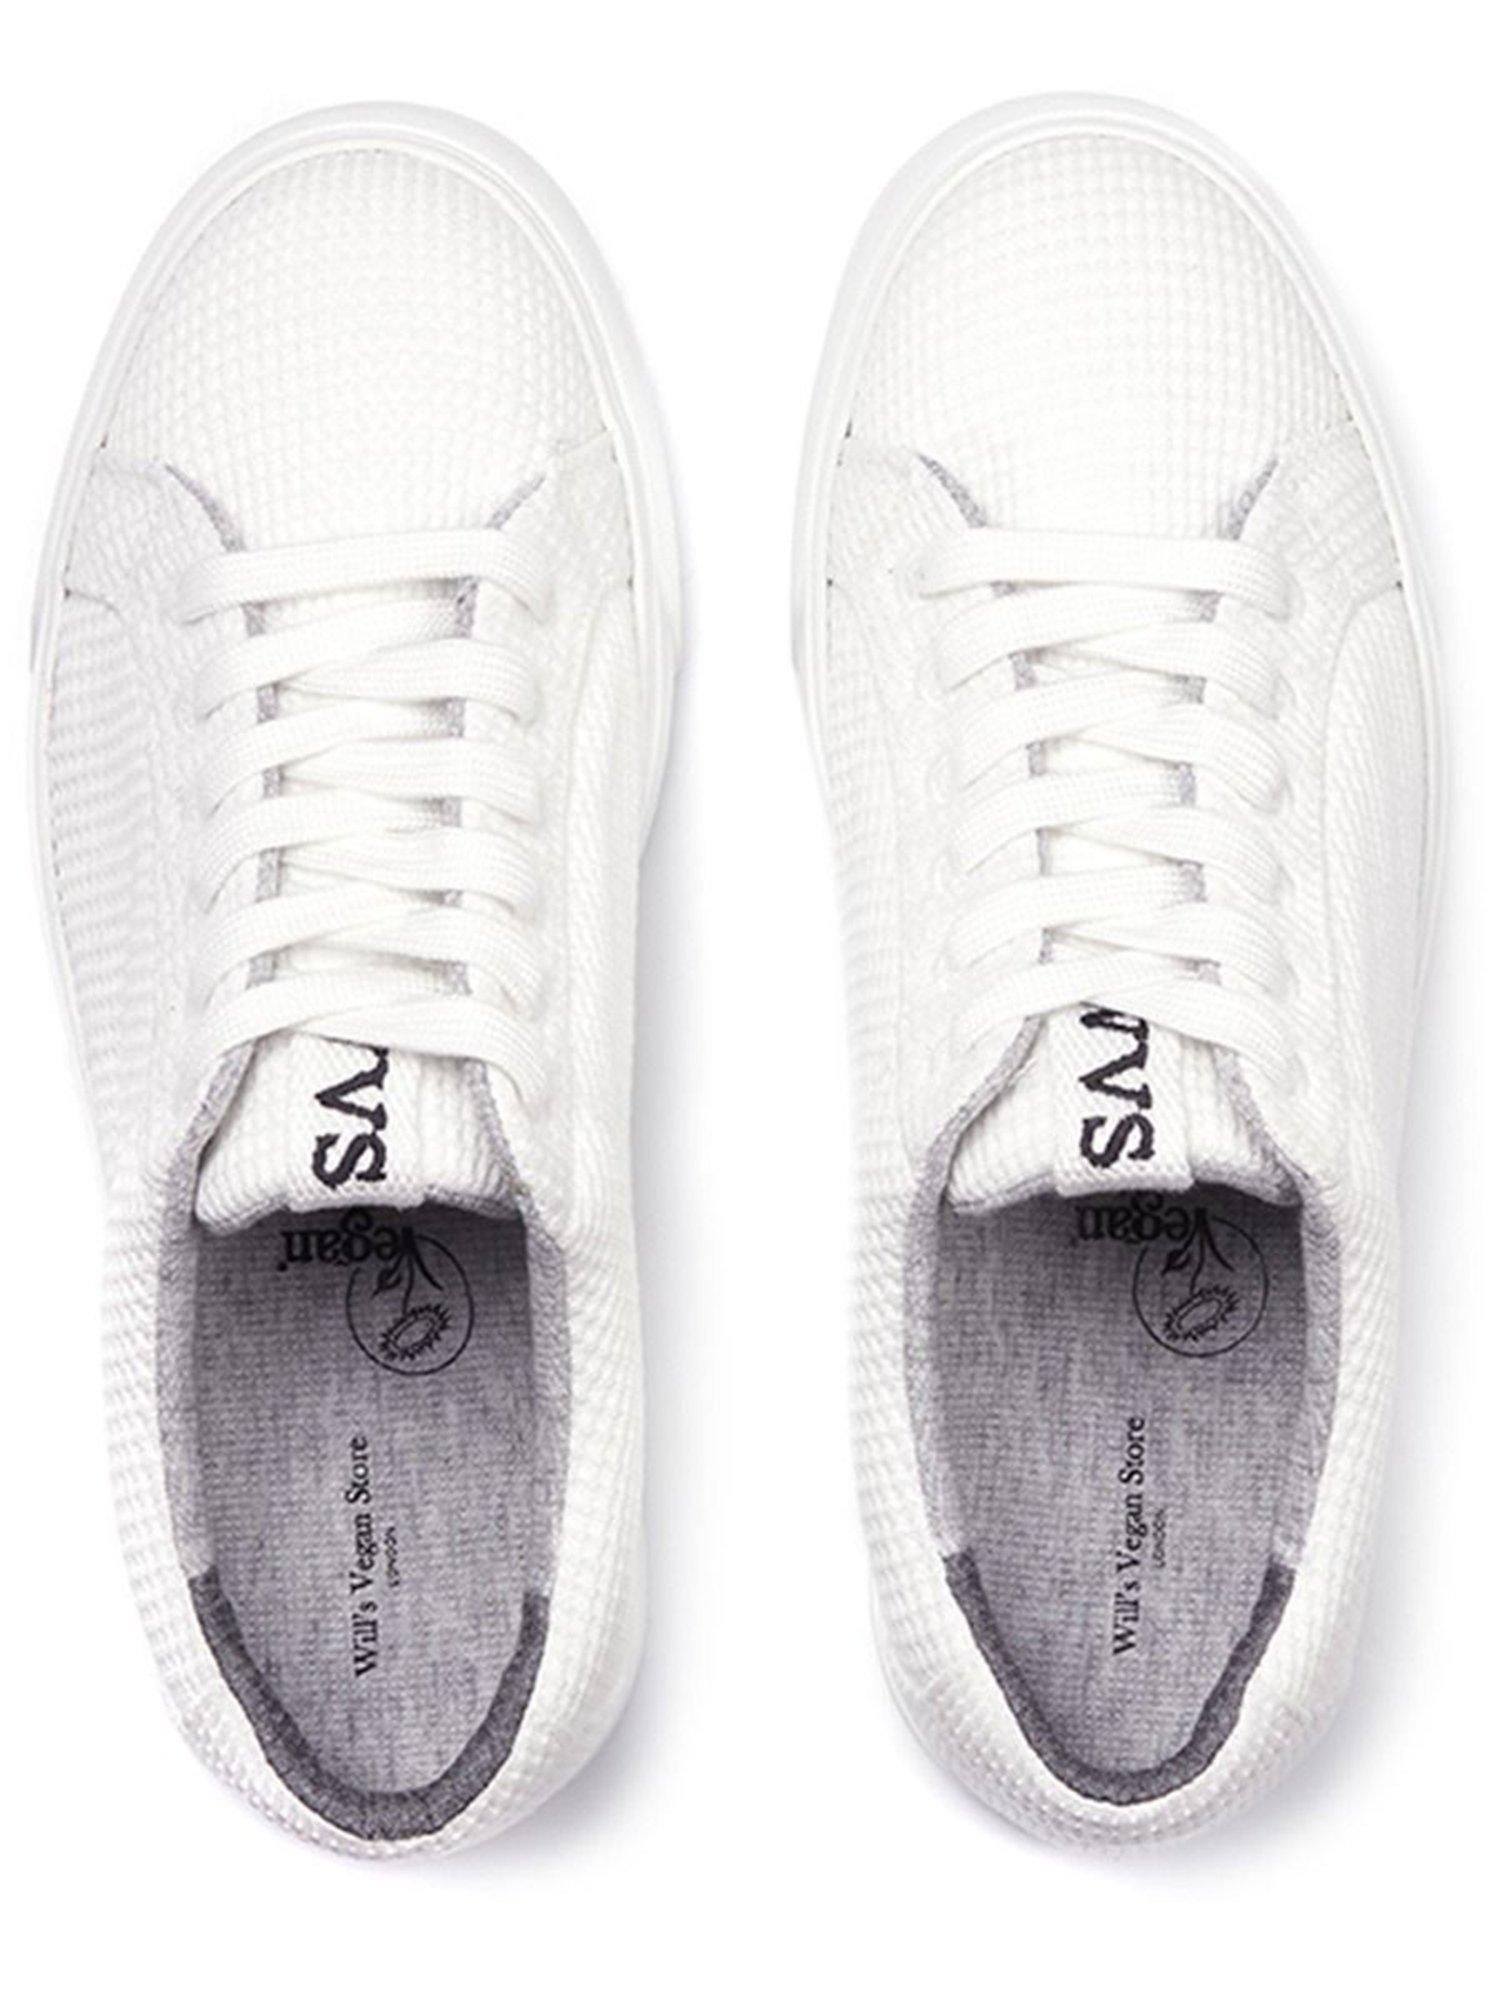 Sneakers Ldn Biodegradable White Knit from Shop Like You Give a Damn